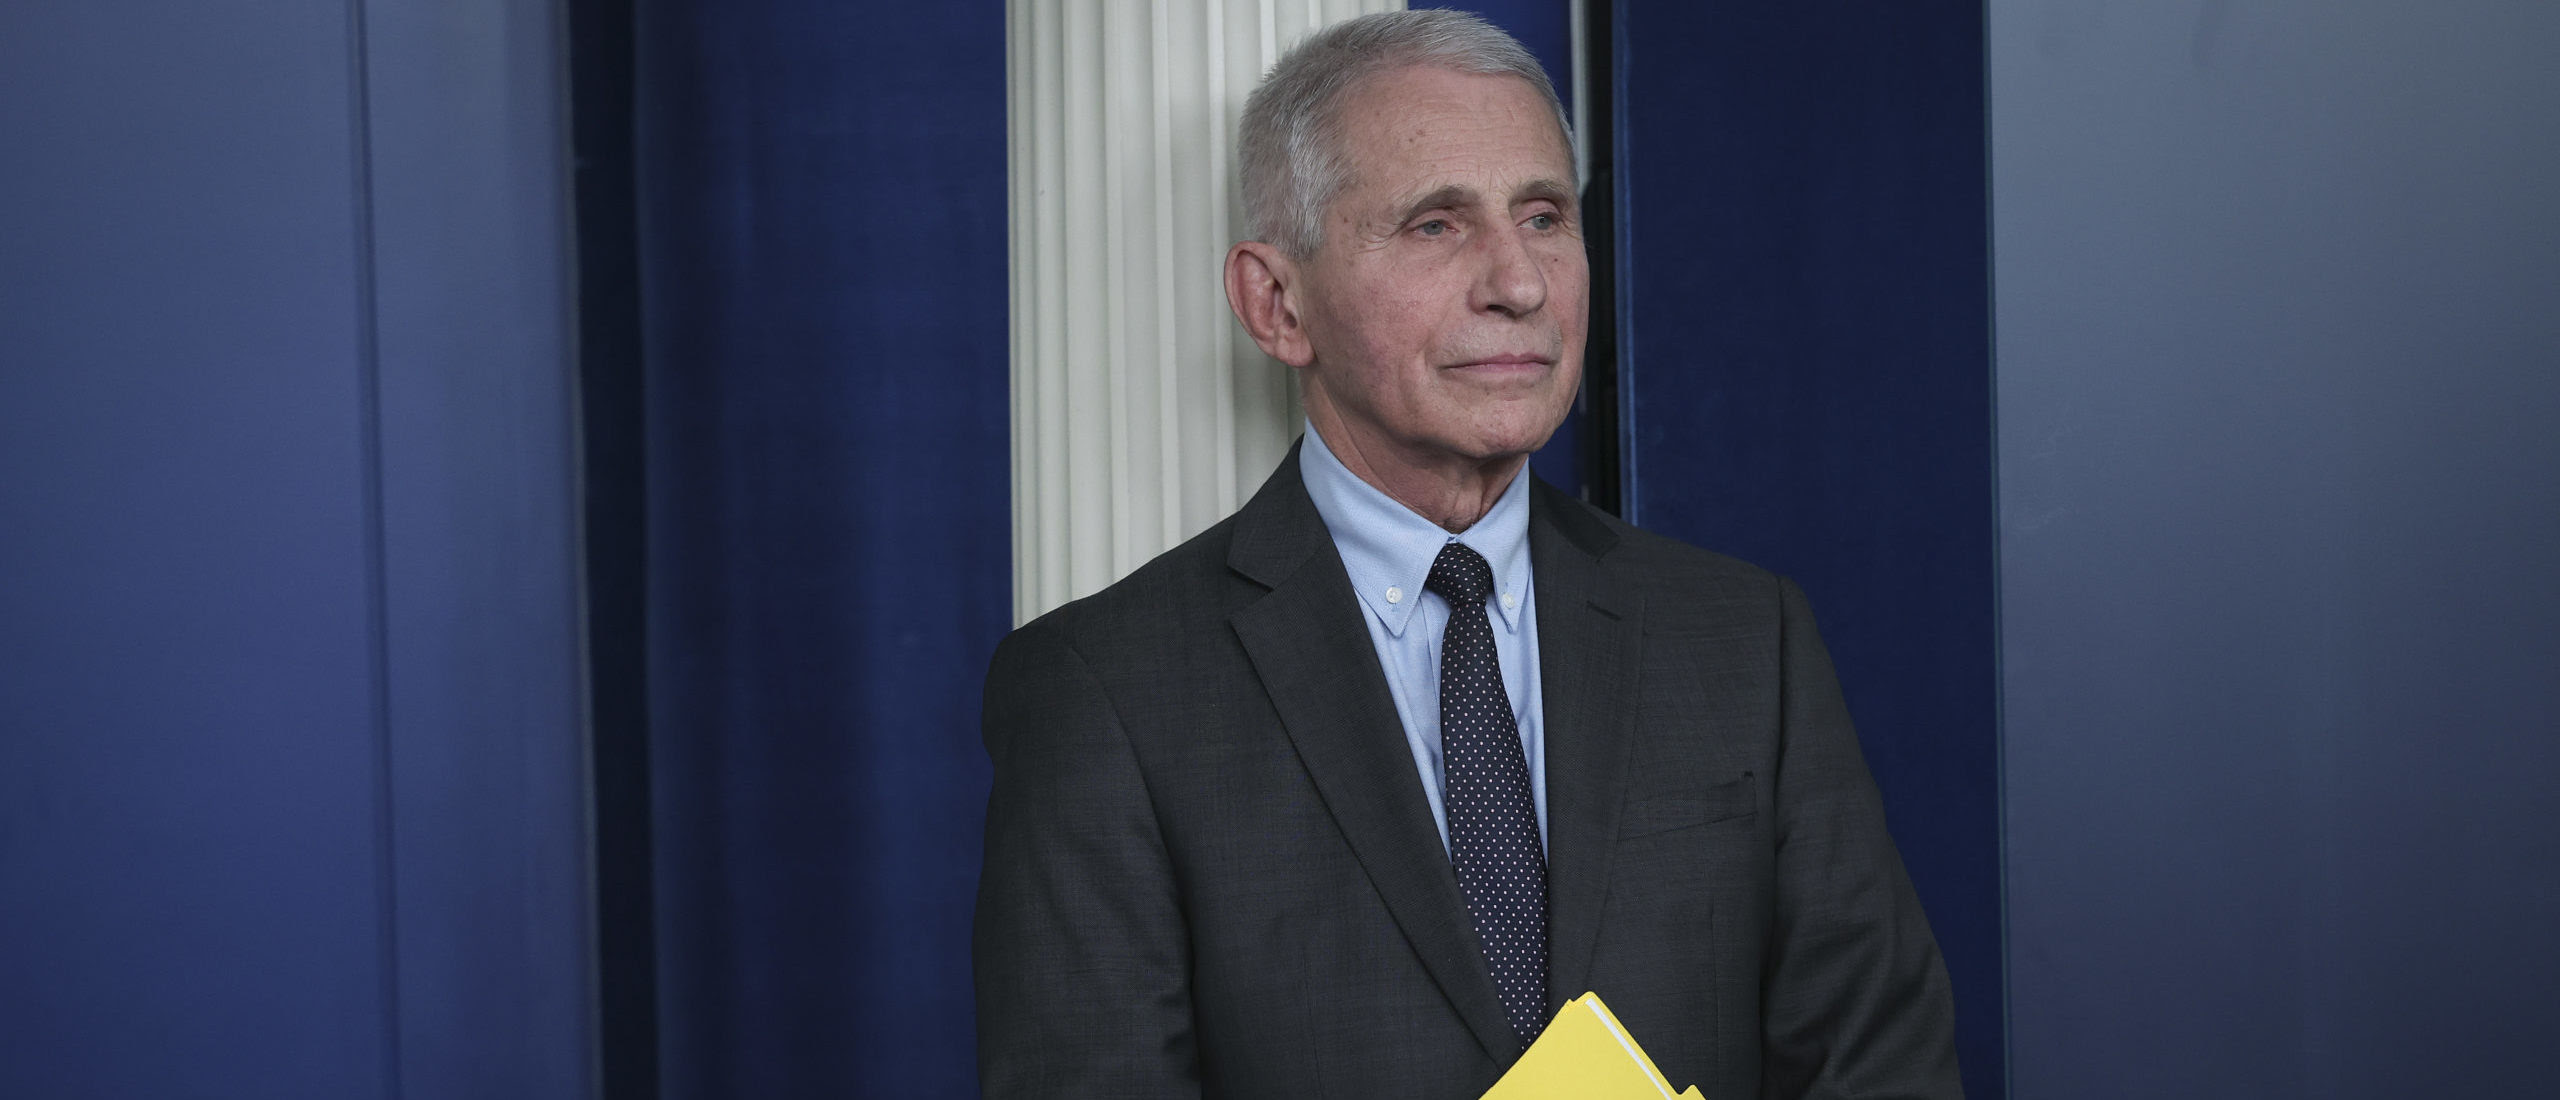 ‘Wild West’: New Emails Reveal Fauci, NIH Officials Considered Warning FBI About Potential Lab Leak